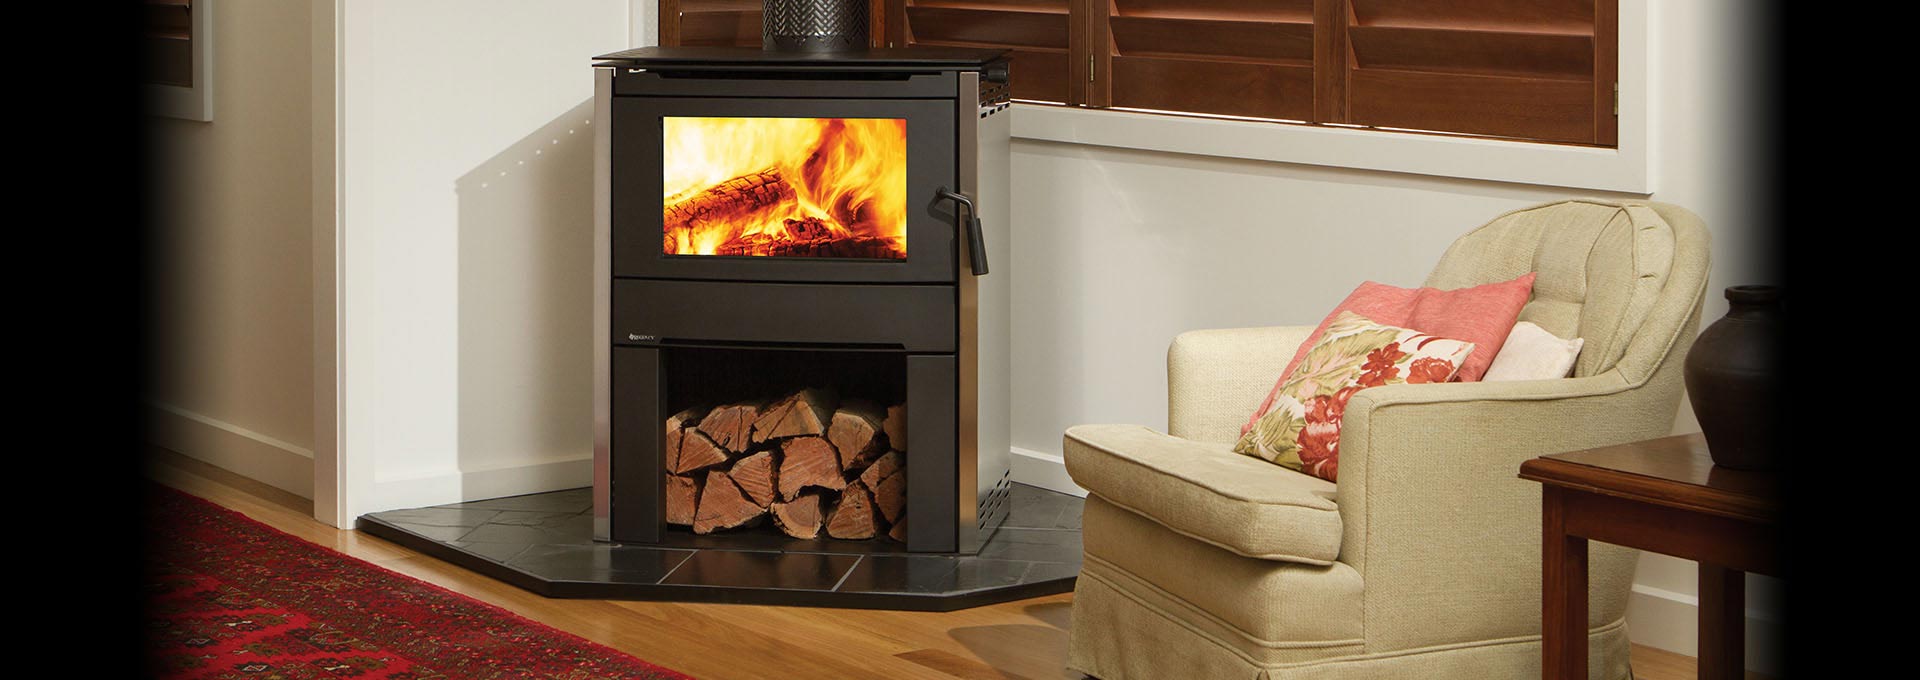 Regency is the leader in wood freestanding heaters through attention to heat